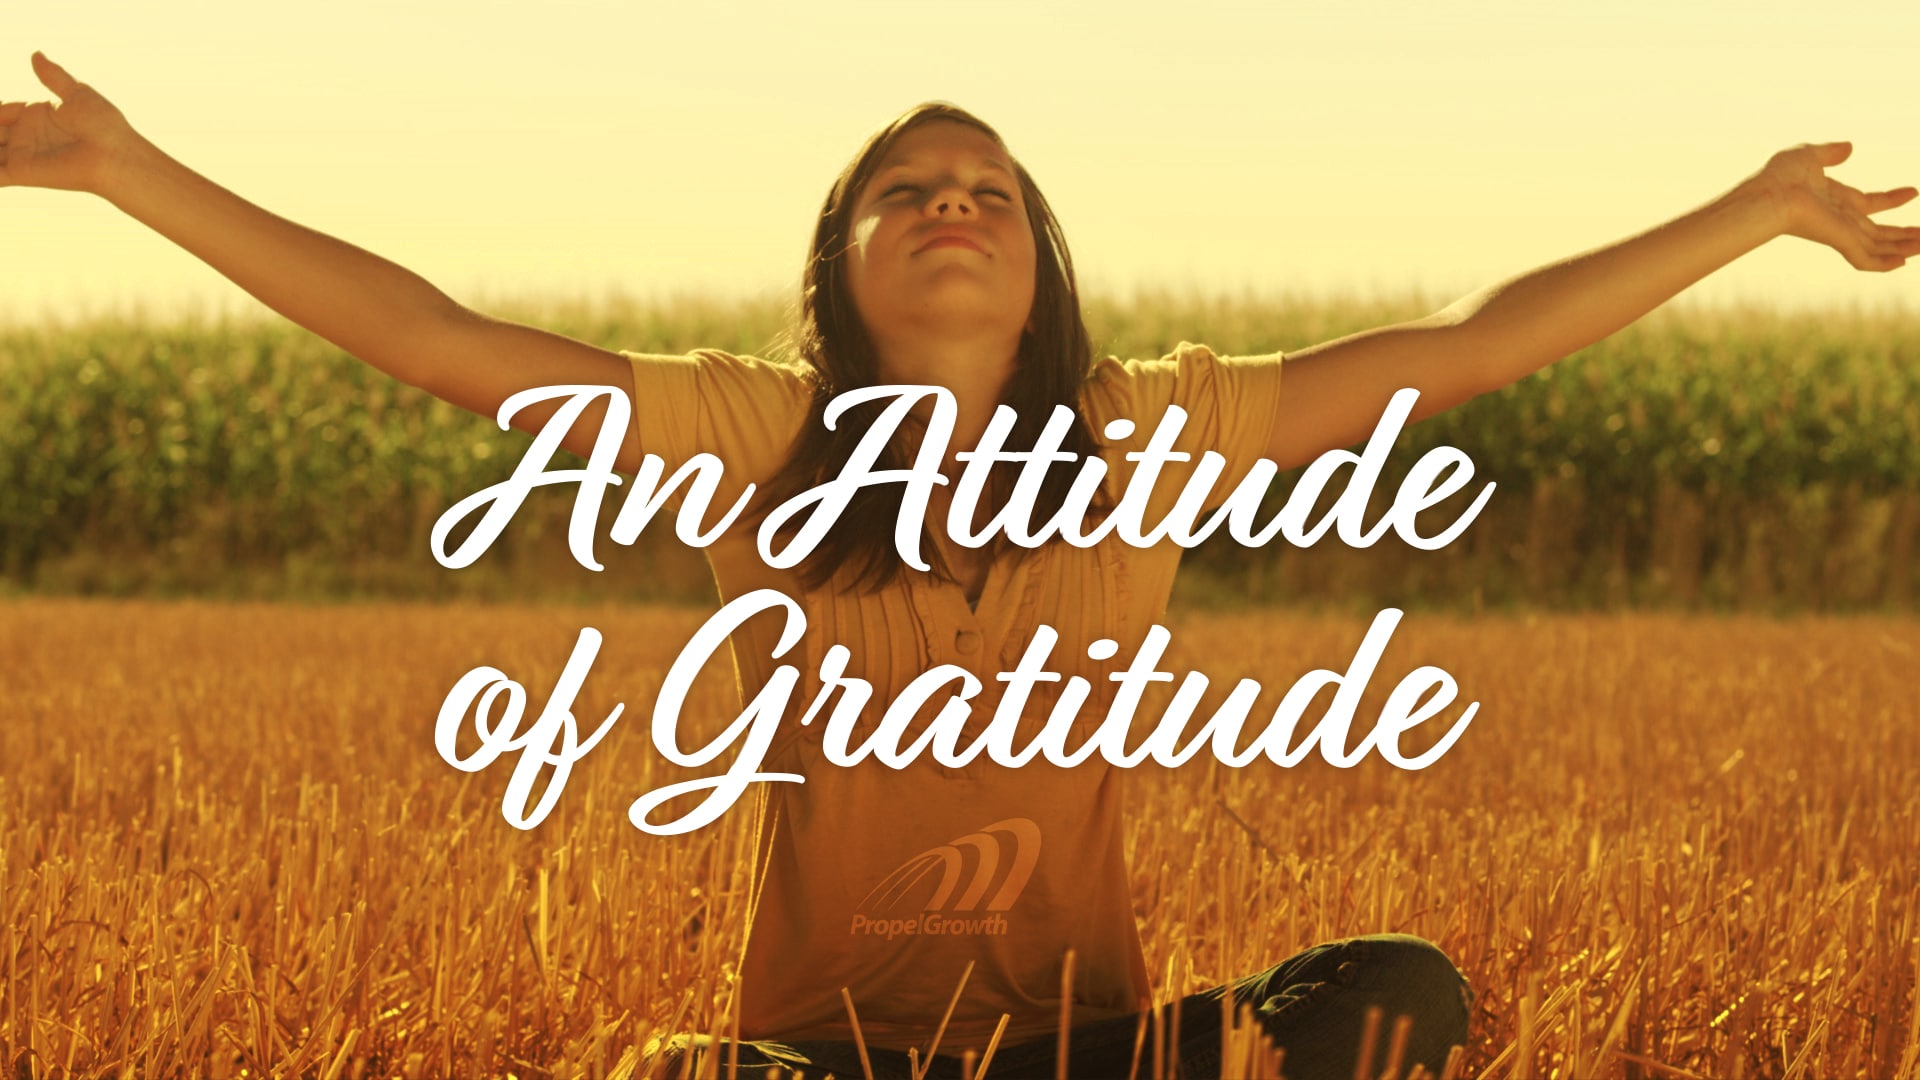 For 2020, Let’s Cultivate an Attitude of Gratitude